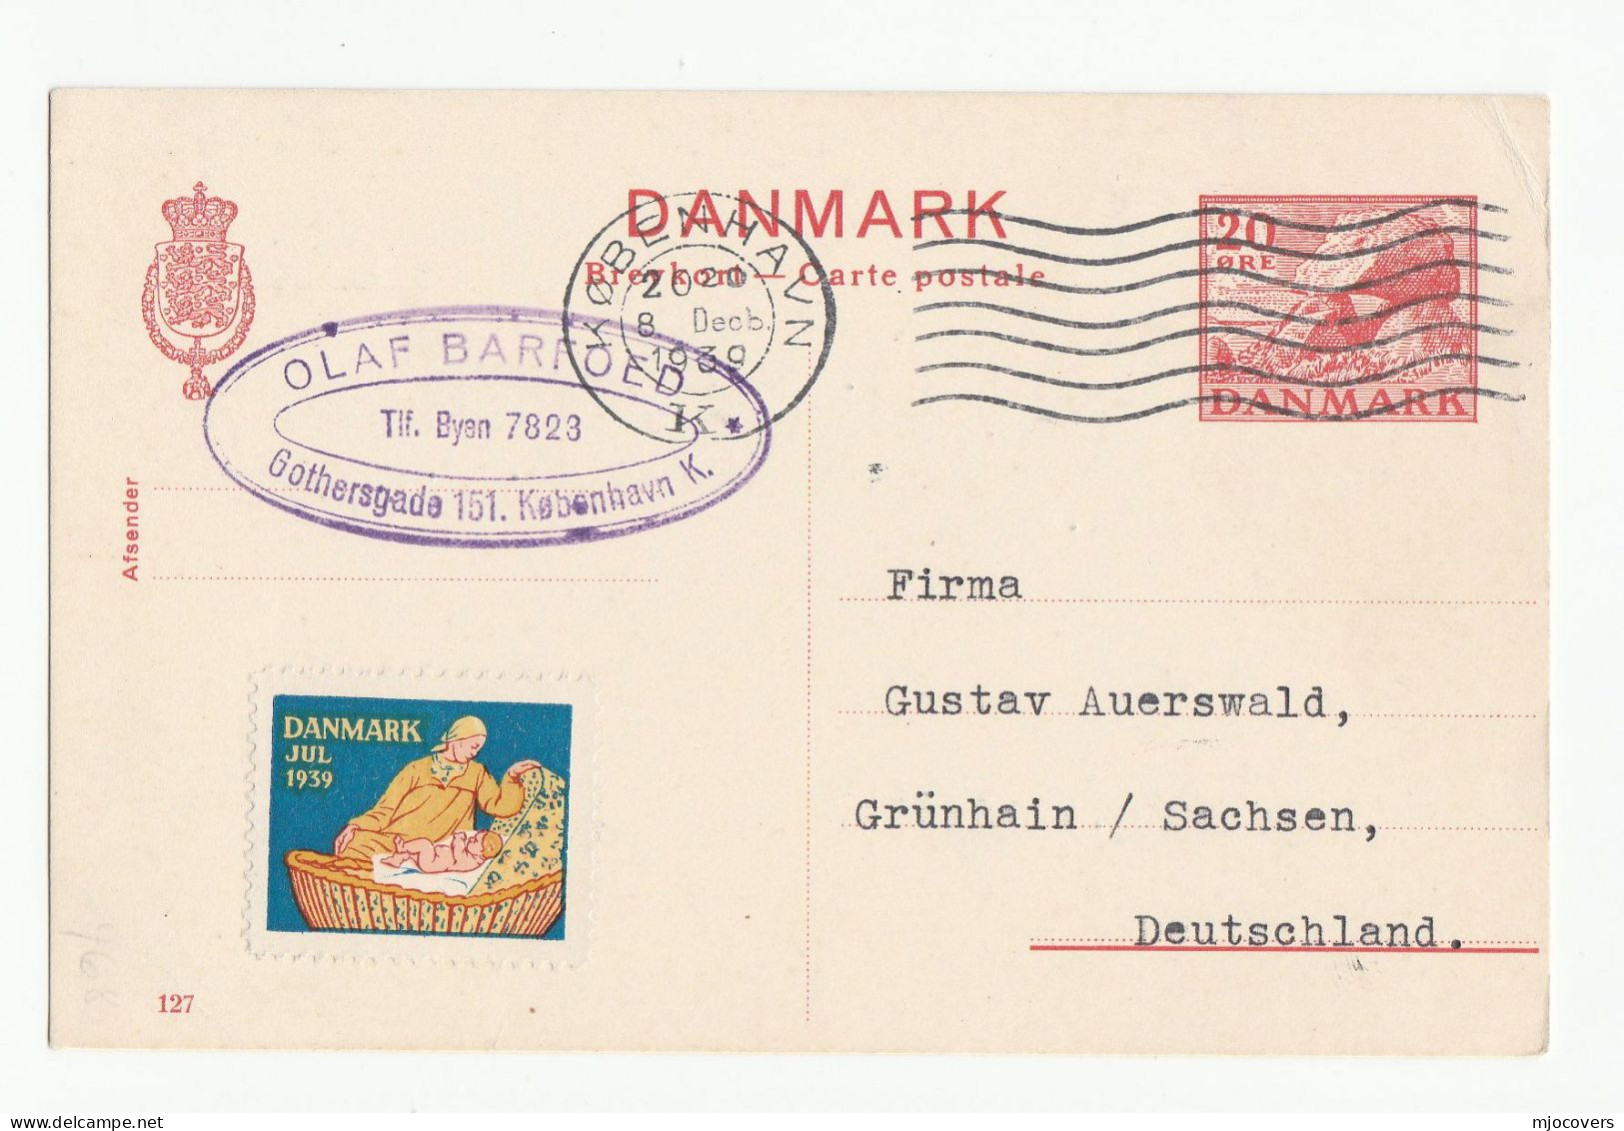 1939 DENMARK To Grunhain Germany With CHRISTMAS Label Women Baby POSTAL STATIONERY CARD Cover Stamps - Entiers Postaux